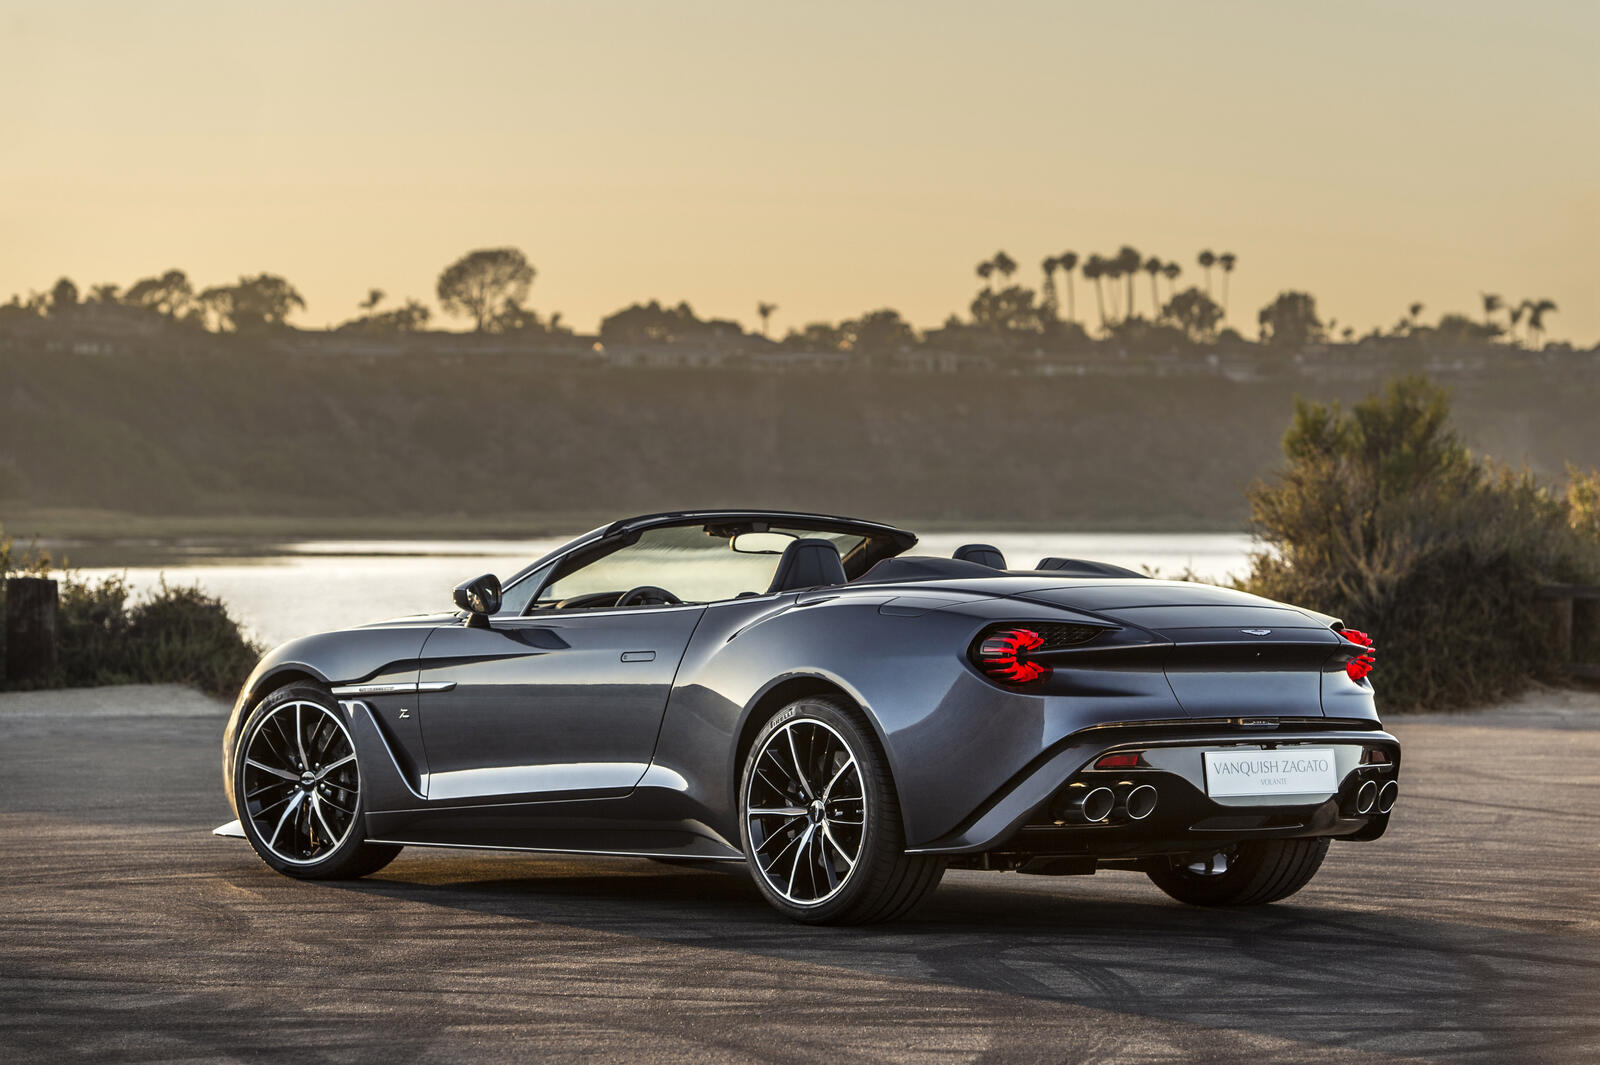 Free photo Picture of a gray Aston Martin Vanquish rear view.